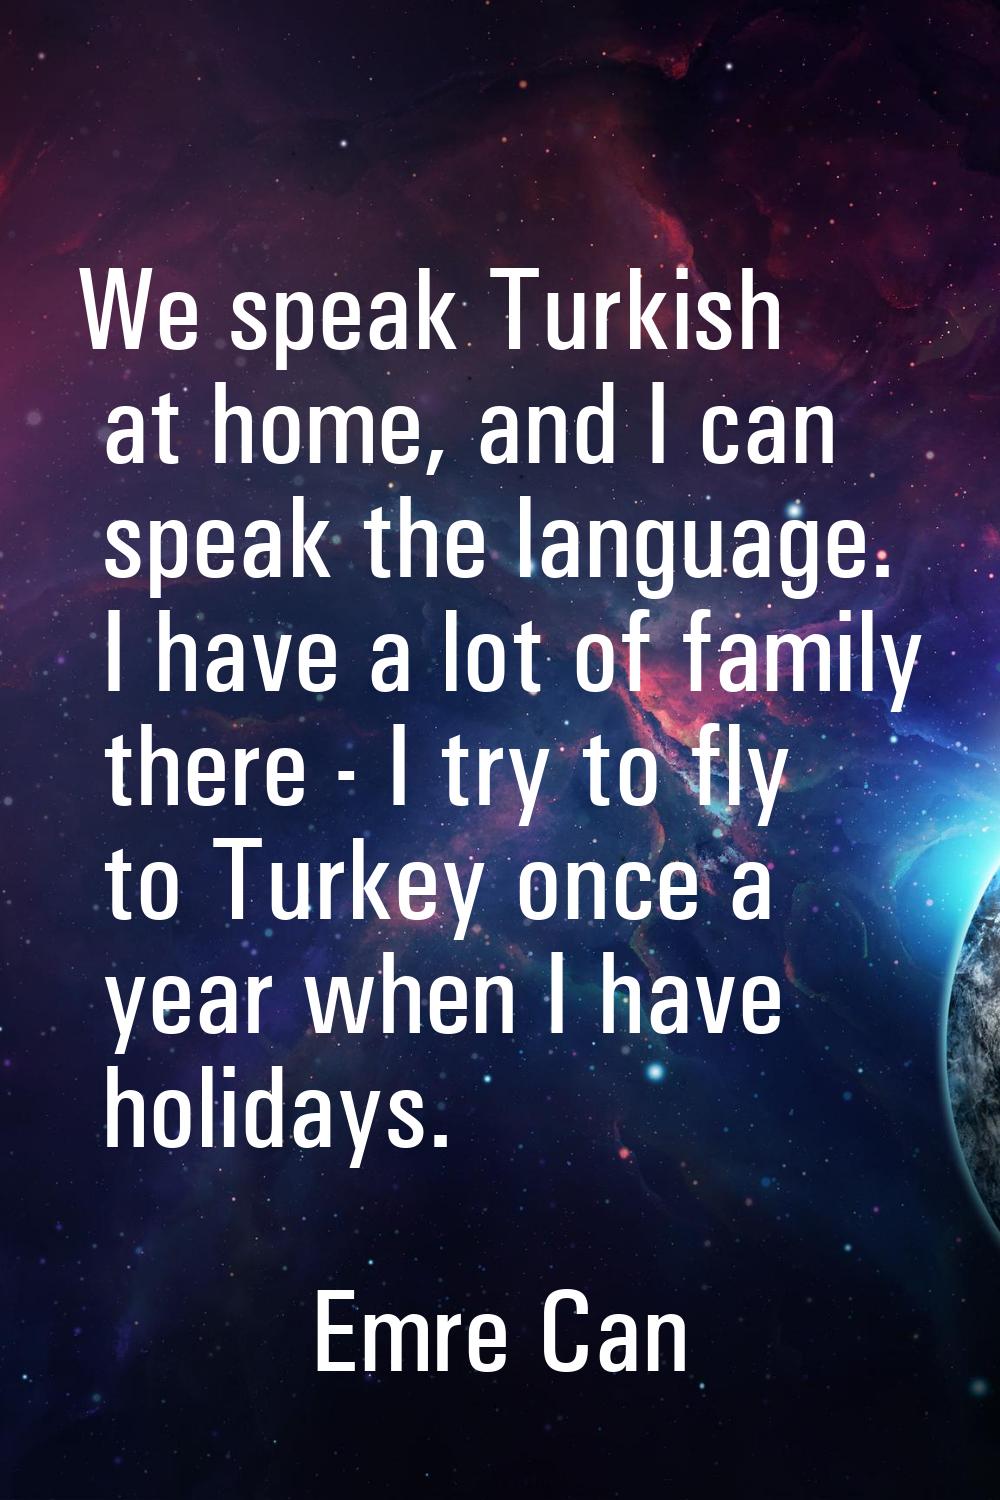 We speak Turkish at home, and I can speak the language. I have a lot of family there - I try to fly